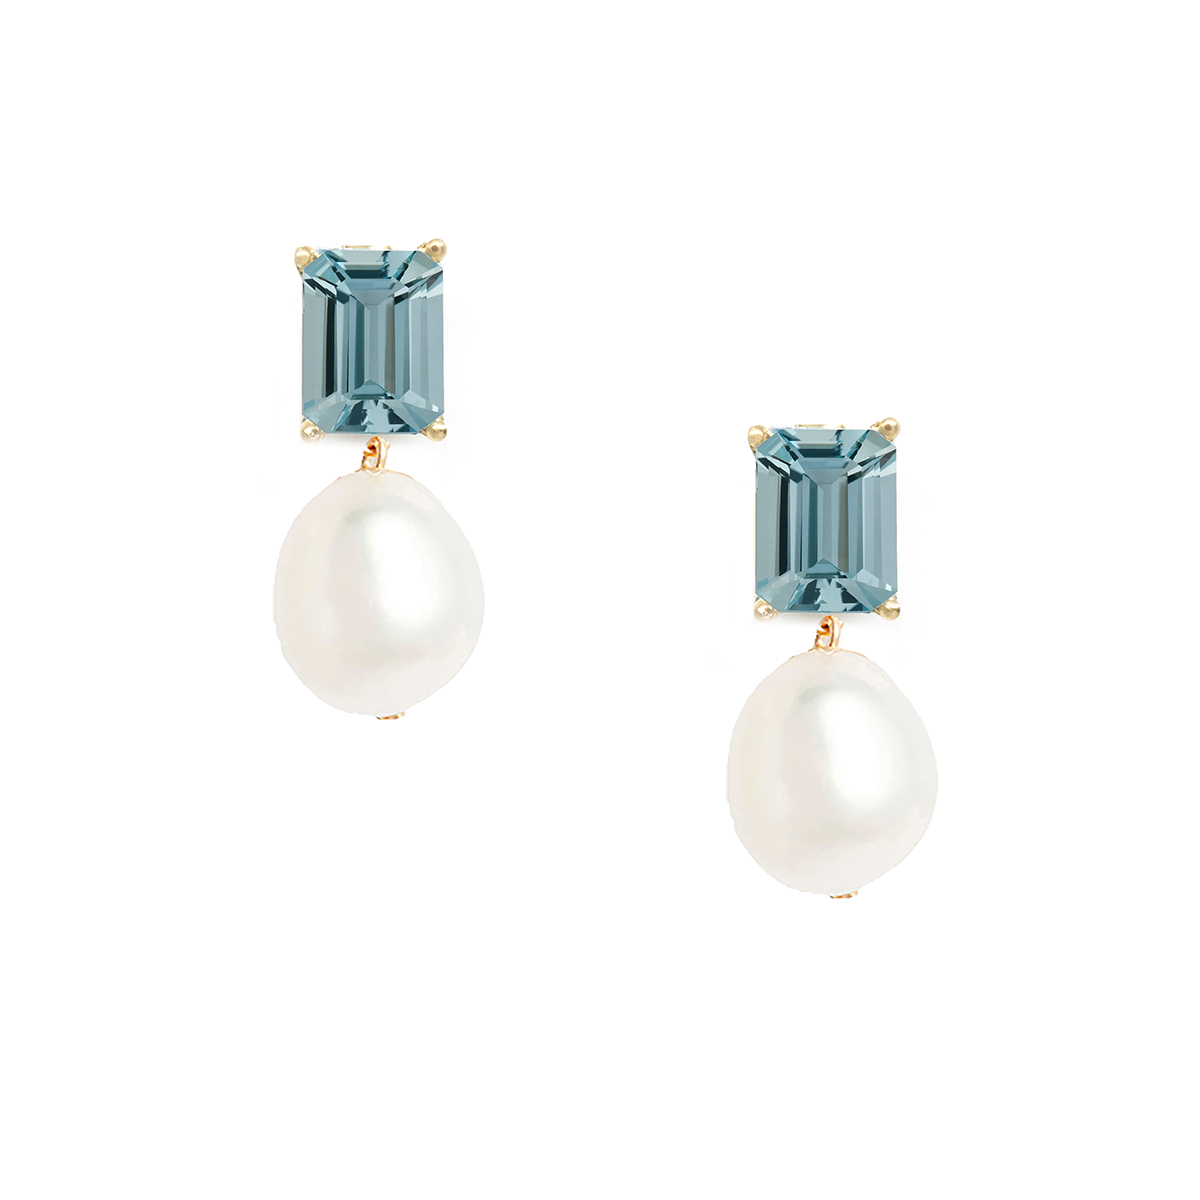 Blue Topaz and Pearl Drop Earrings in 14ct yellow gold - Tomfoolery London